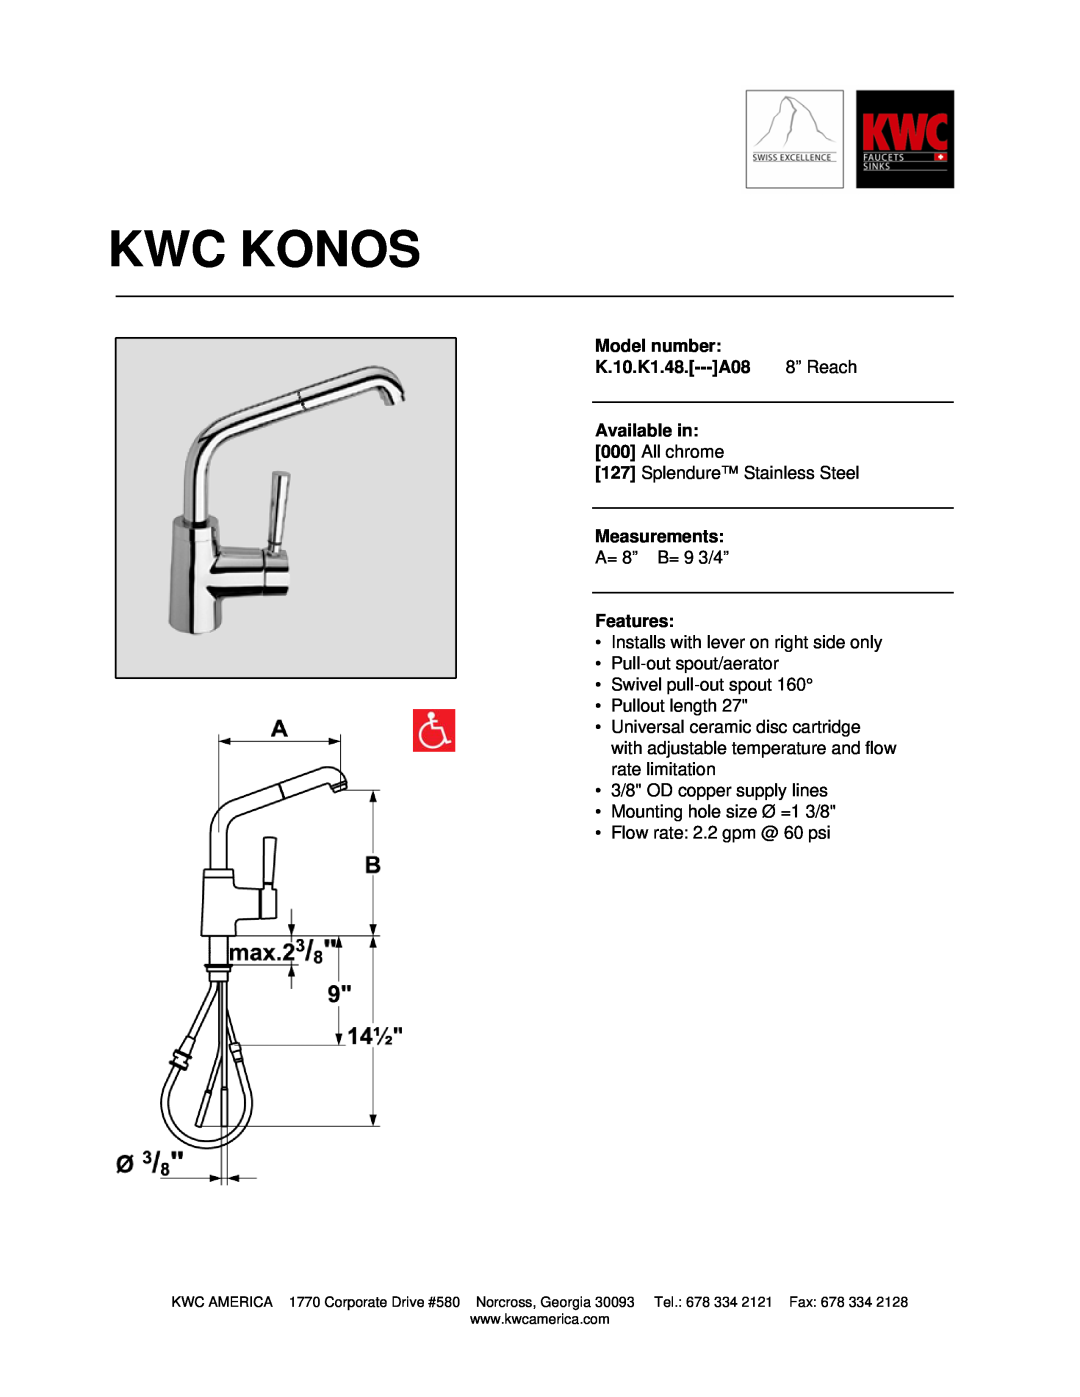 KWC manual Kwc Konos, Model number, K.10.K1.48.---A08, 8” Reach, Available in, Measurements, Features 